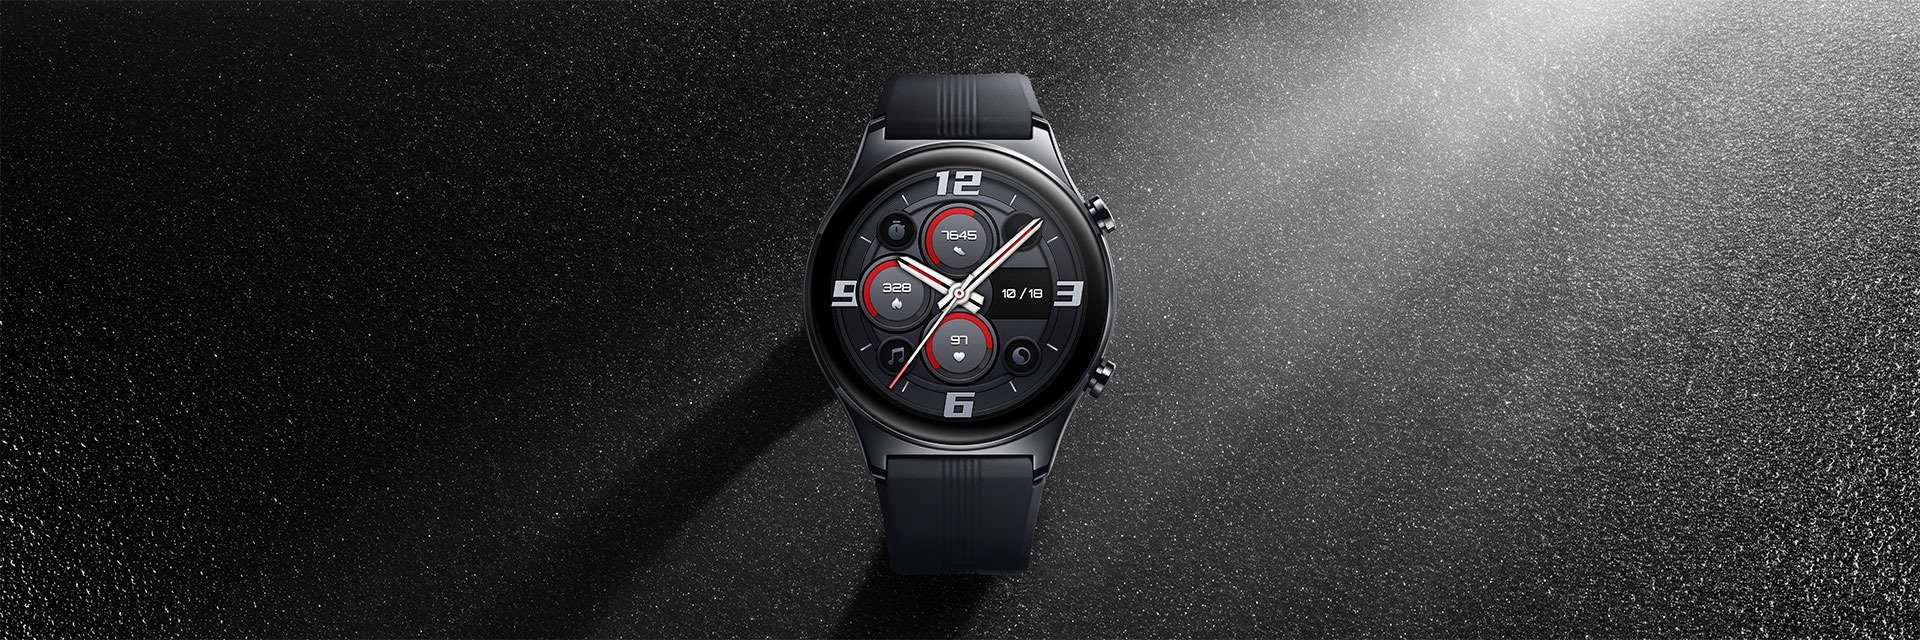 honor watch gs3 1